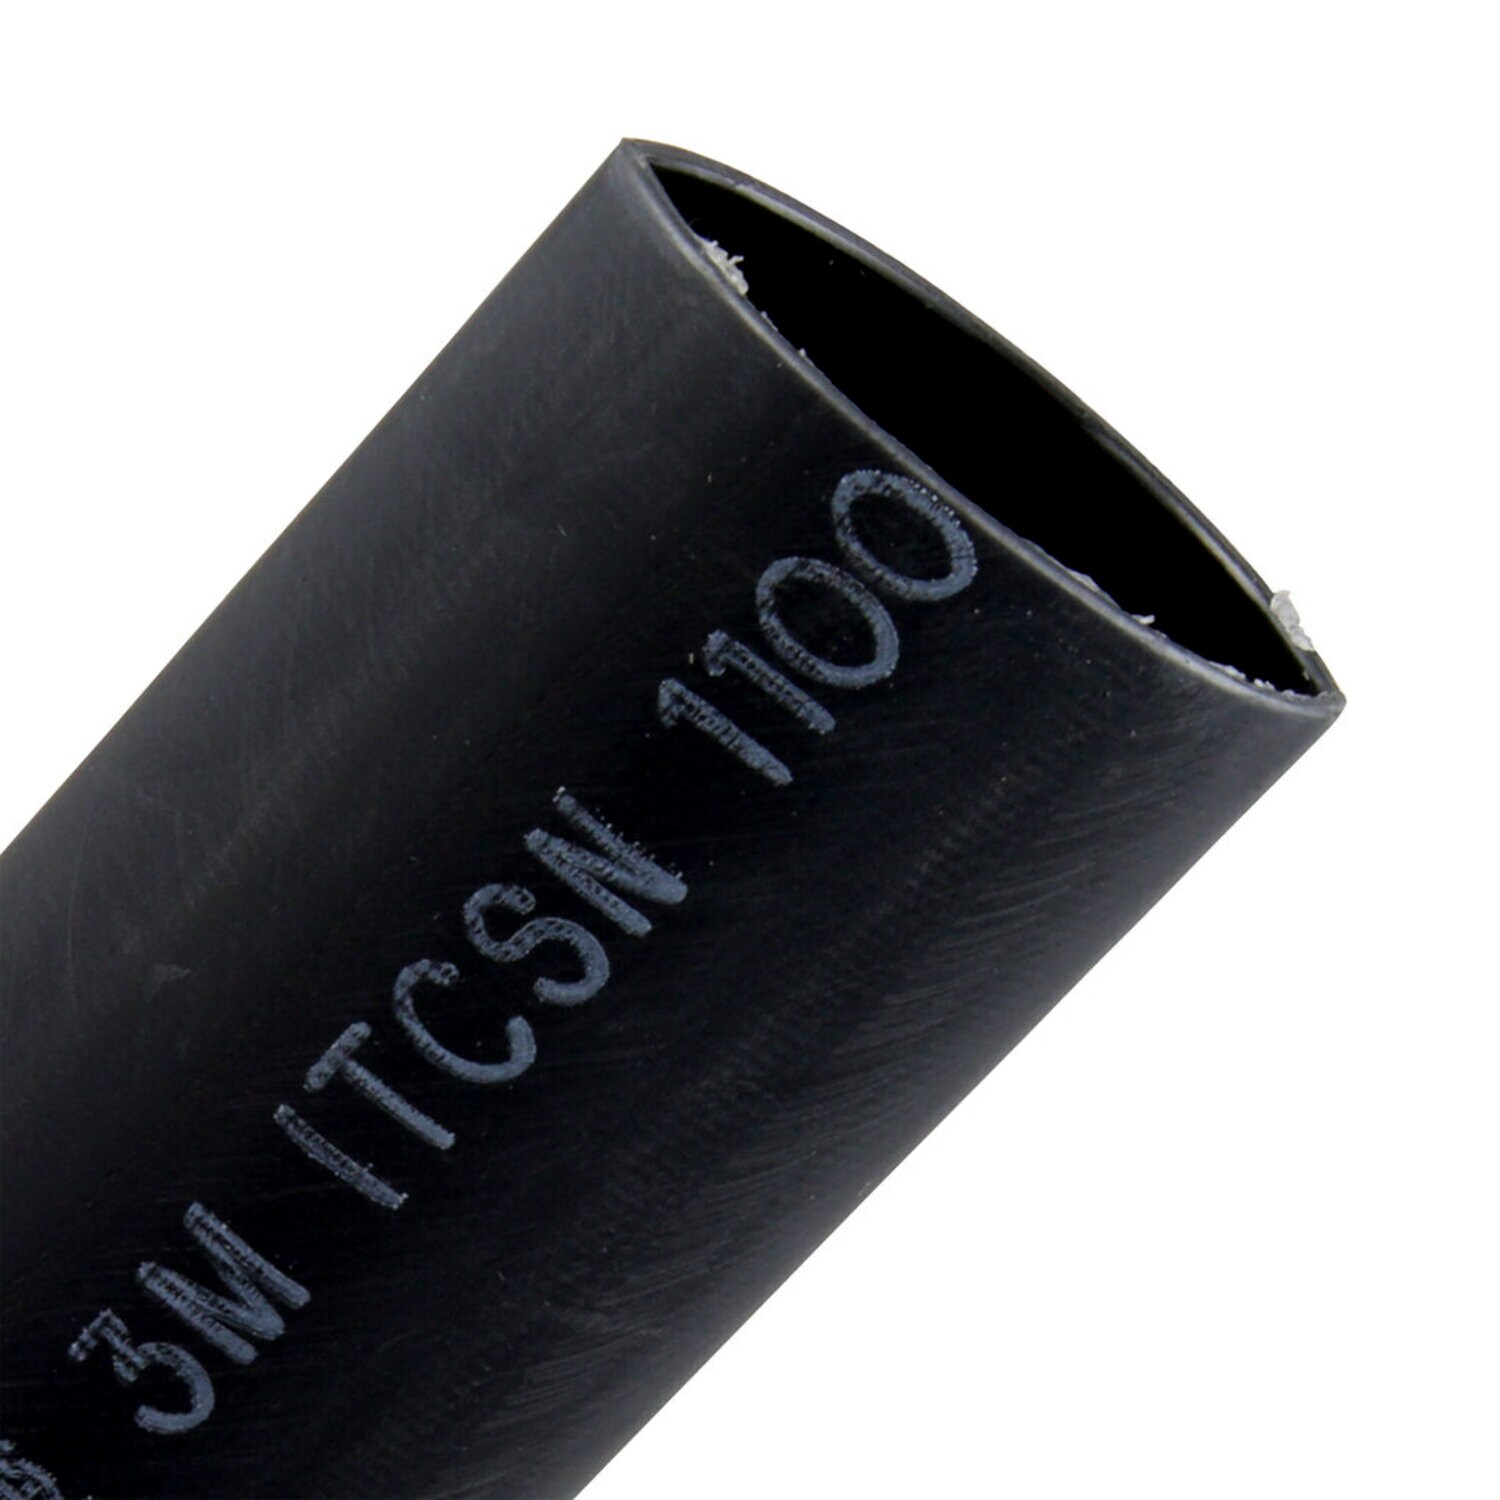 7000132380 - 3M Heat Shrink Heavy-Wall Cable Sleeve ITCSN-1100, 2-4/0 AWG,
Expanded/Recovered I.D. 1.10/0.37 in, 48 in Length, 5/Case